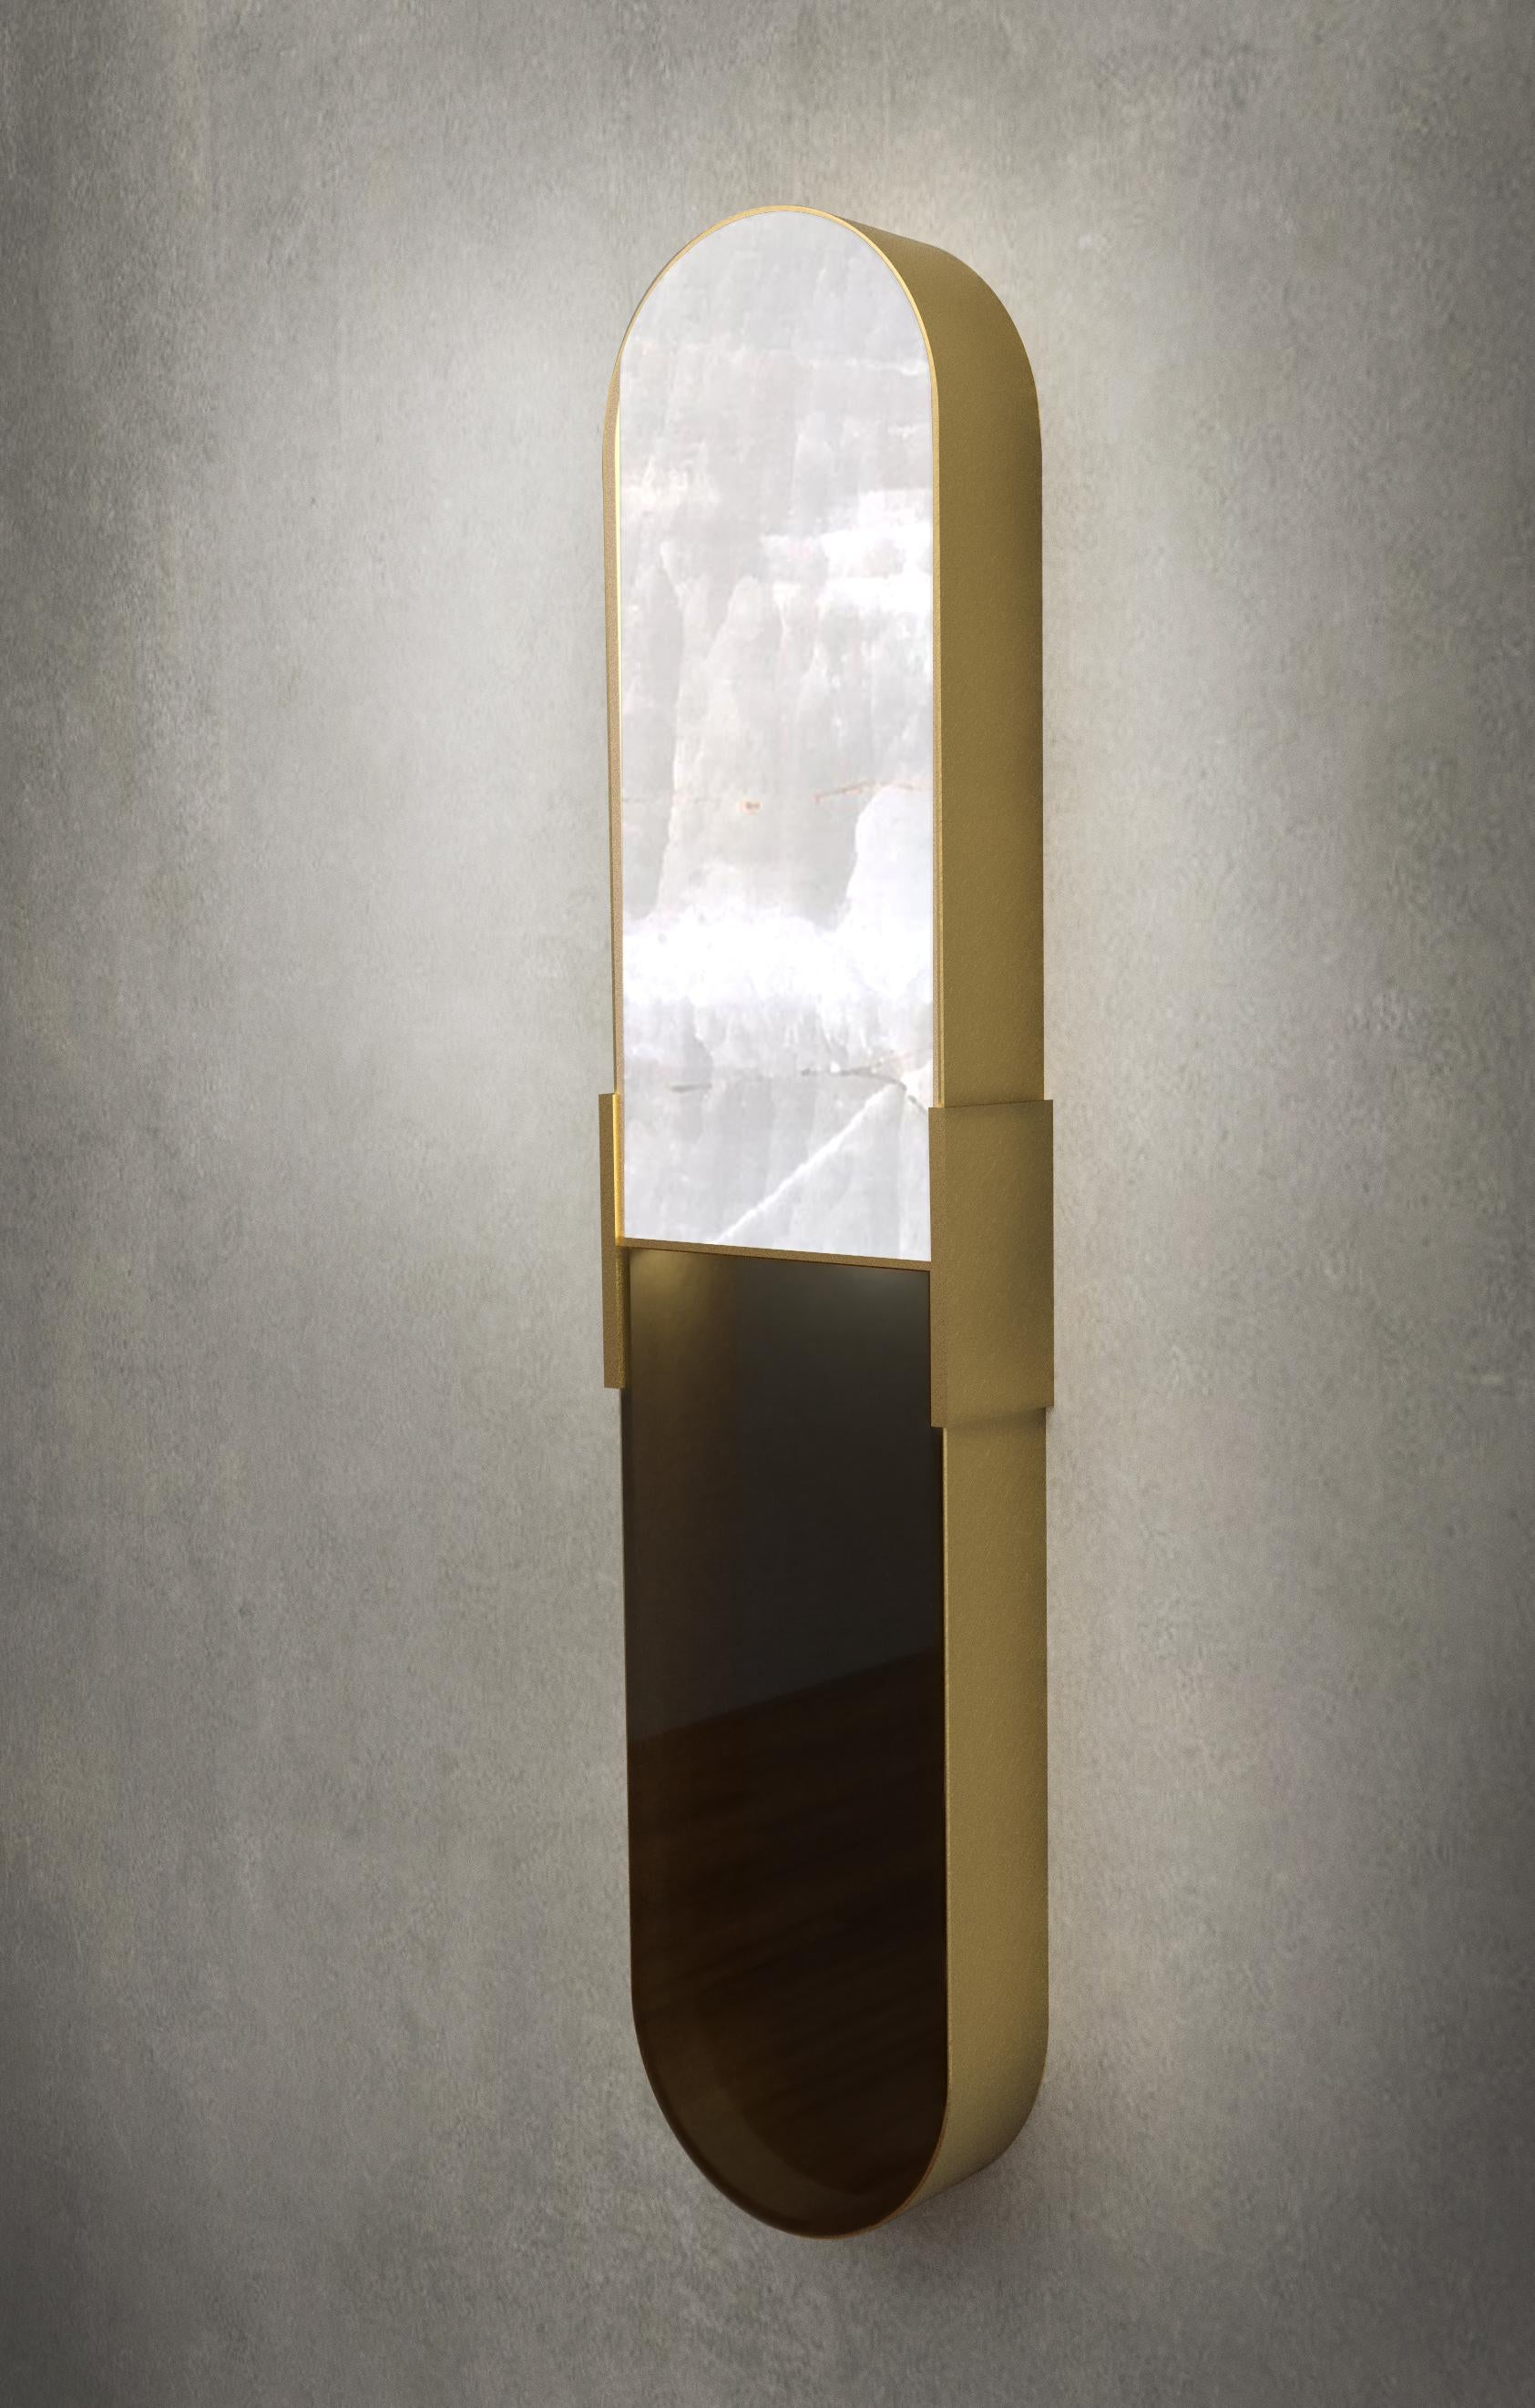 Capsule wall lamp by Stefania Loschi
Dimensions: D x W x H cm
Materials: brass, marble

Wall lamp designed by Stefania Loschi

Stefania Loschi was born in Jordan in 1984 from an Italian-Brazilian family that made her travel the world, live in